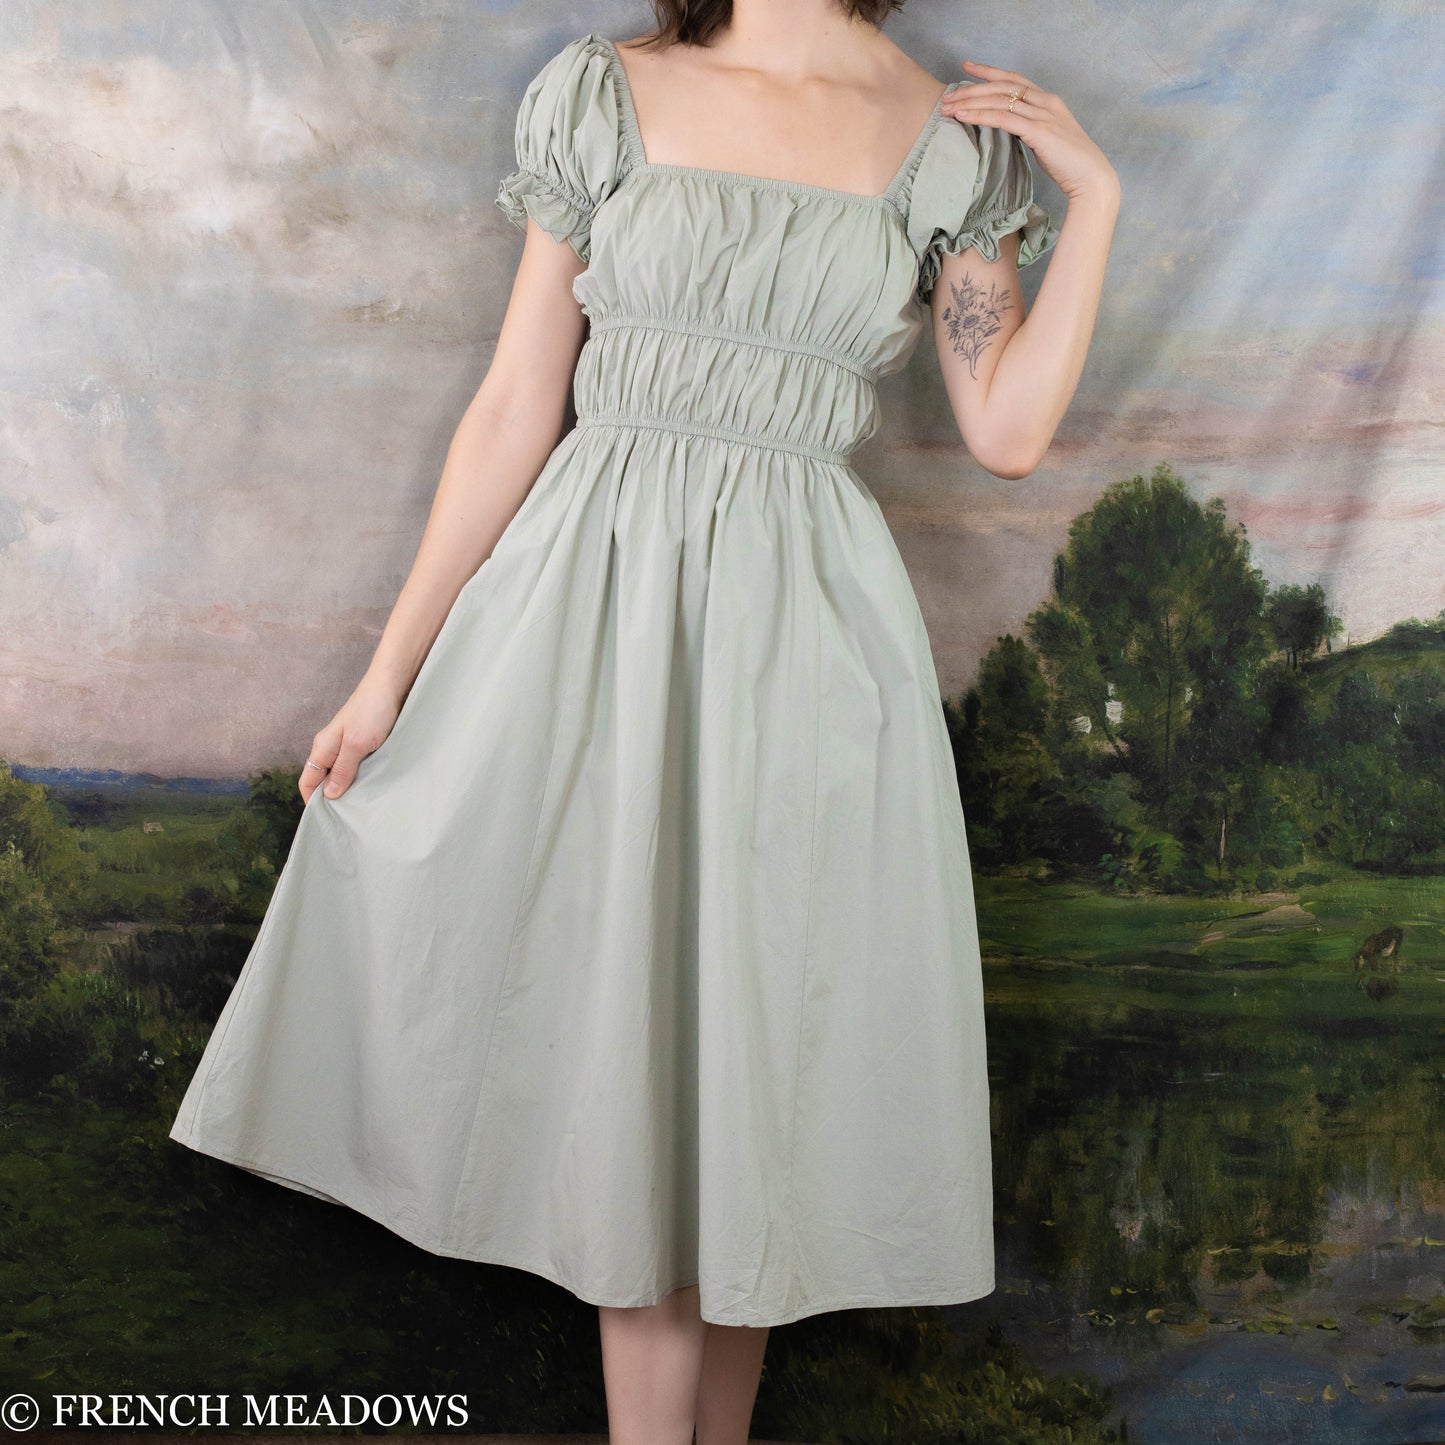 modeling holding out the a-line skirt of her pastel green romantic dress